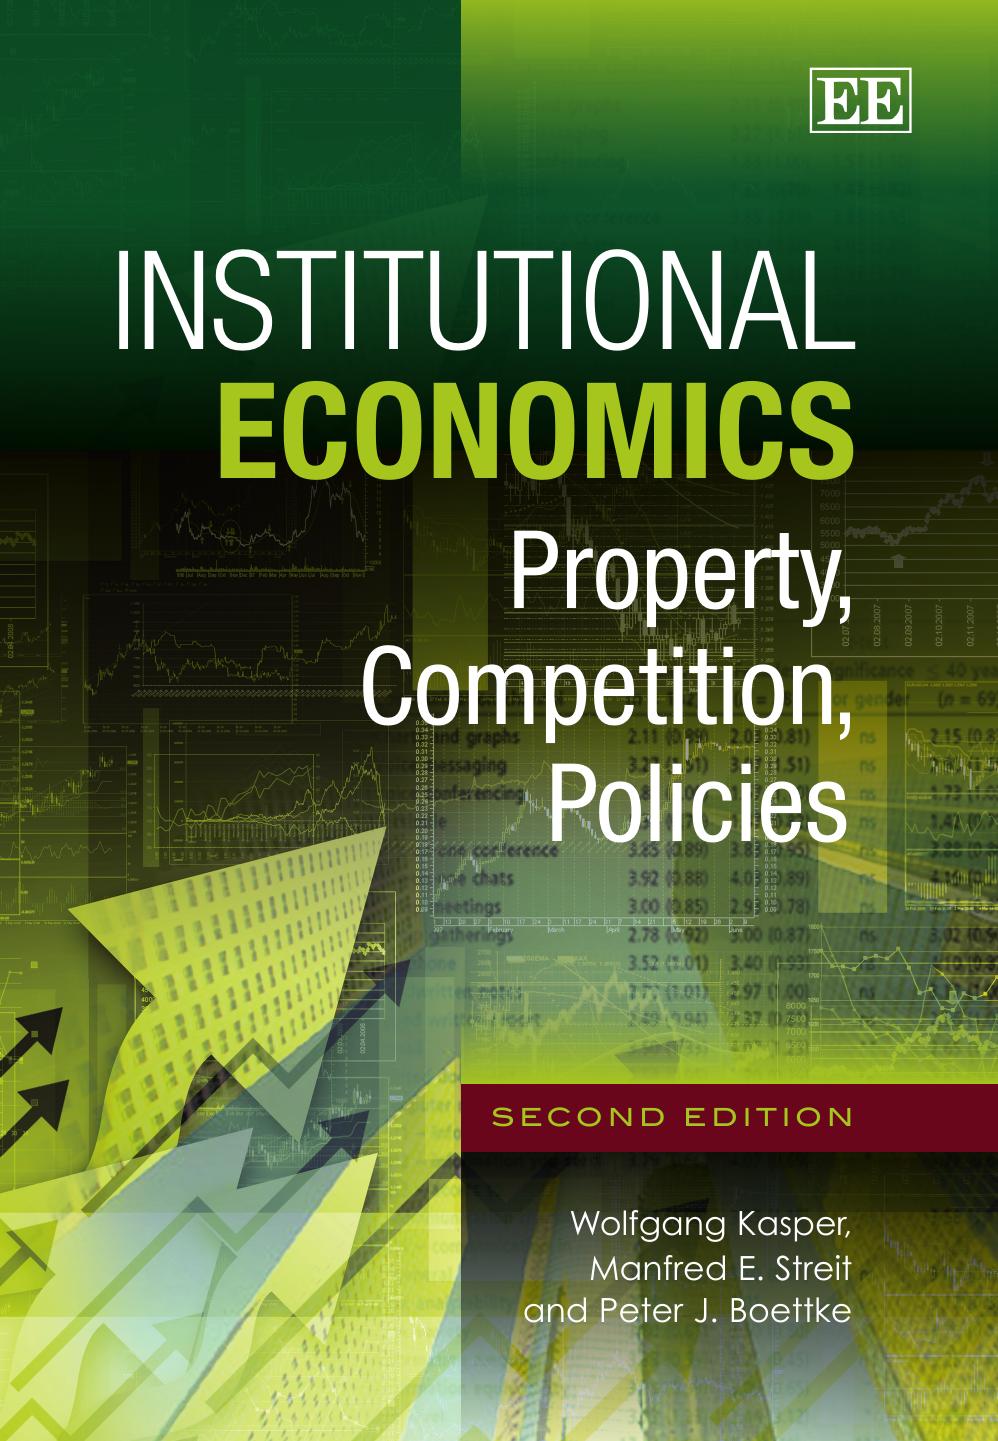 (eBook PDF)Institutional Economics: Property, Competition, Policies, 2nd Edition by Wolfgang Kasper,Manfred E. Streit